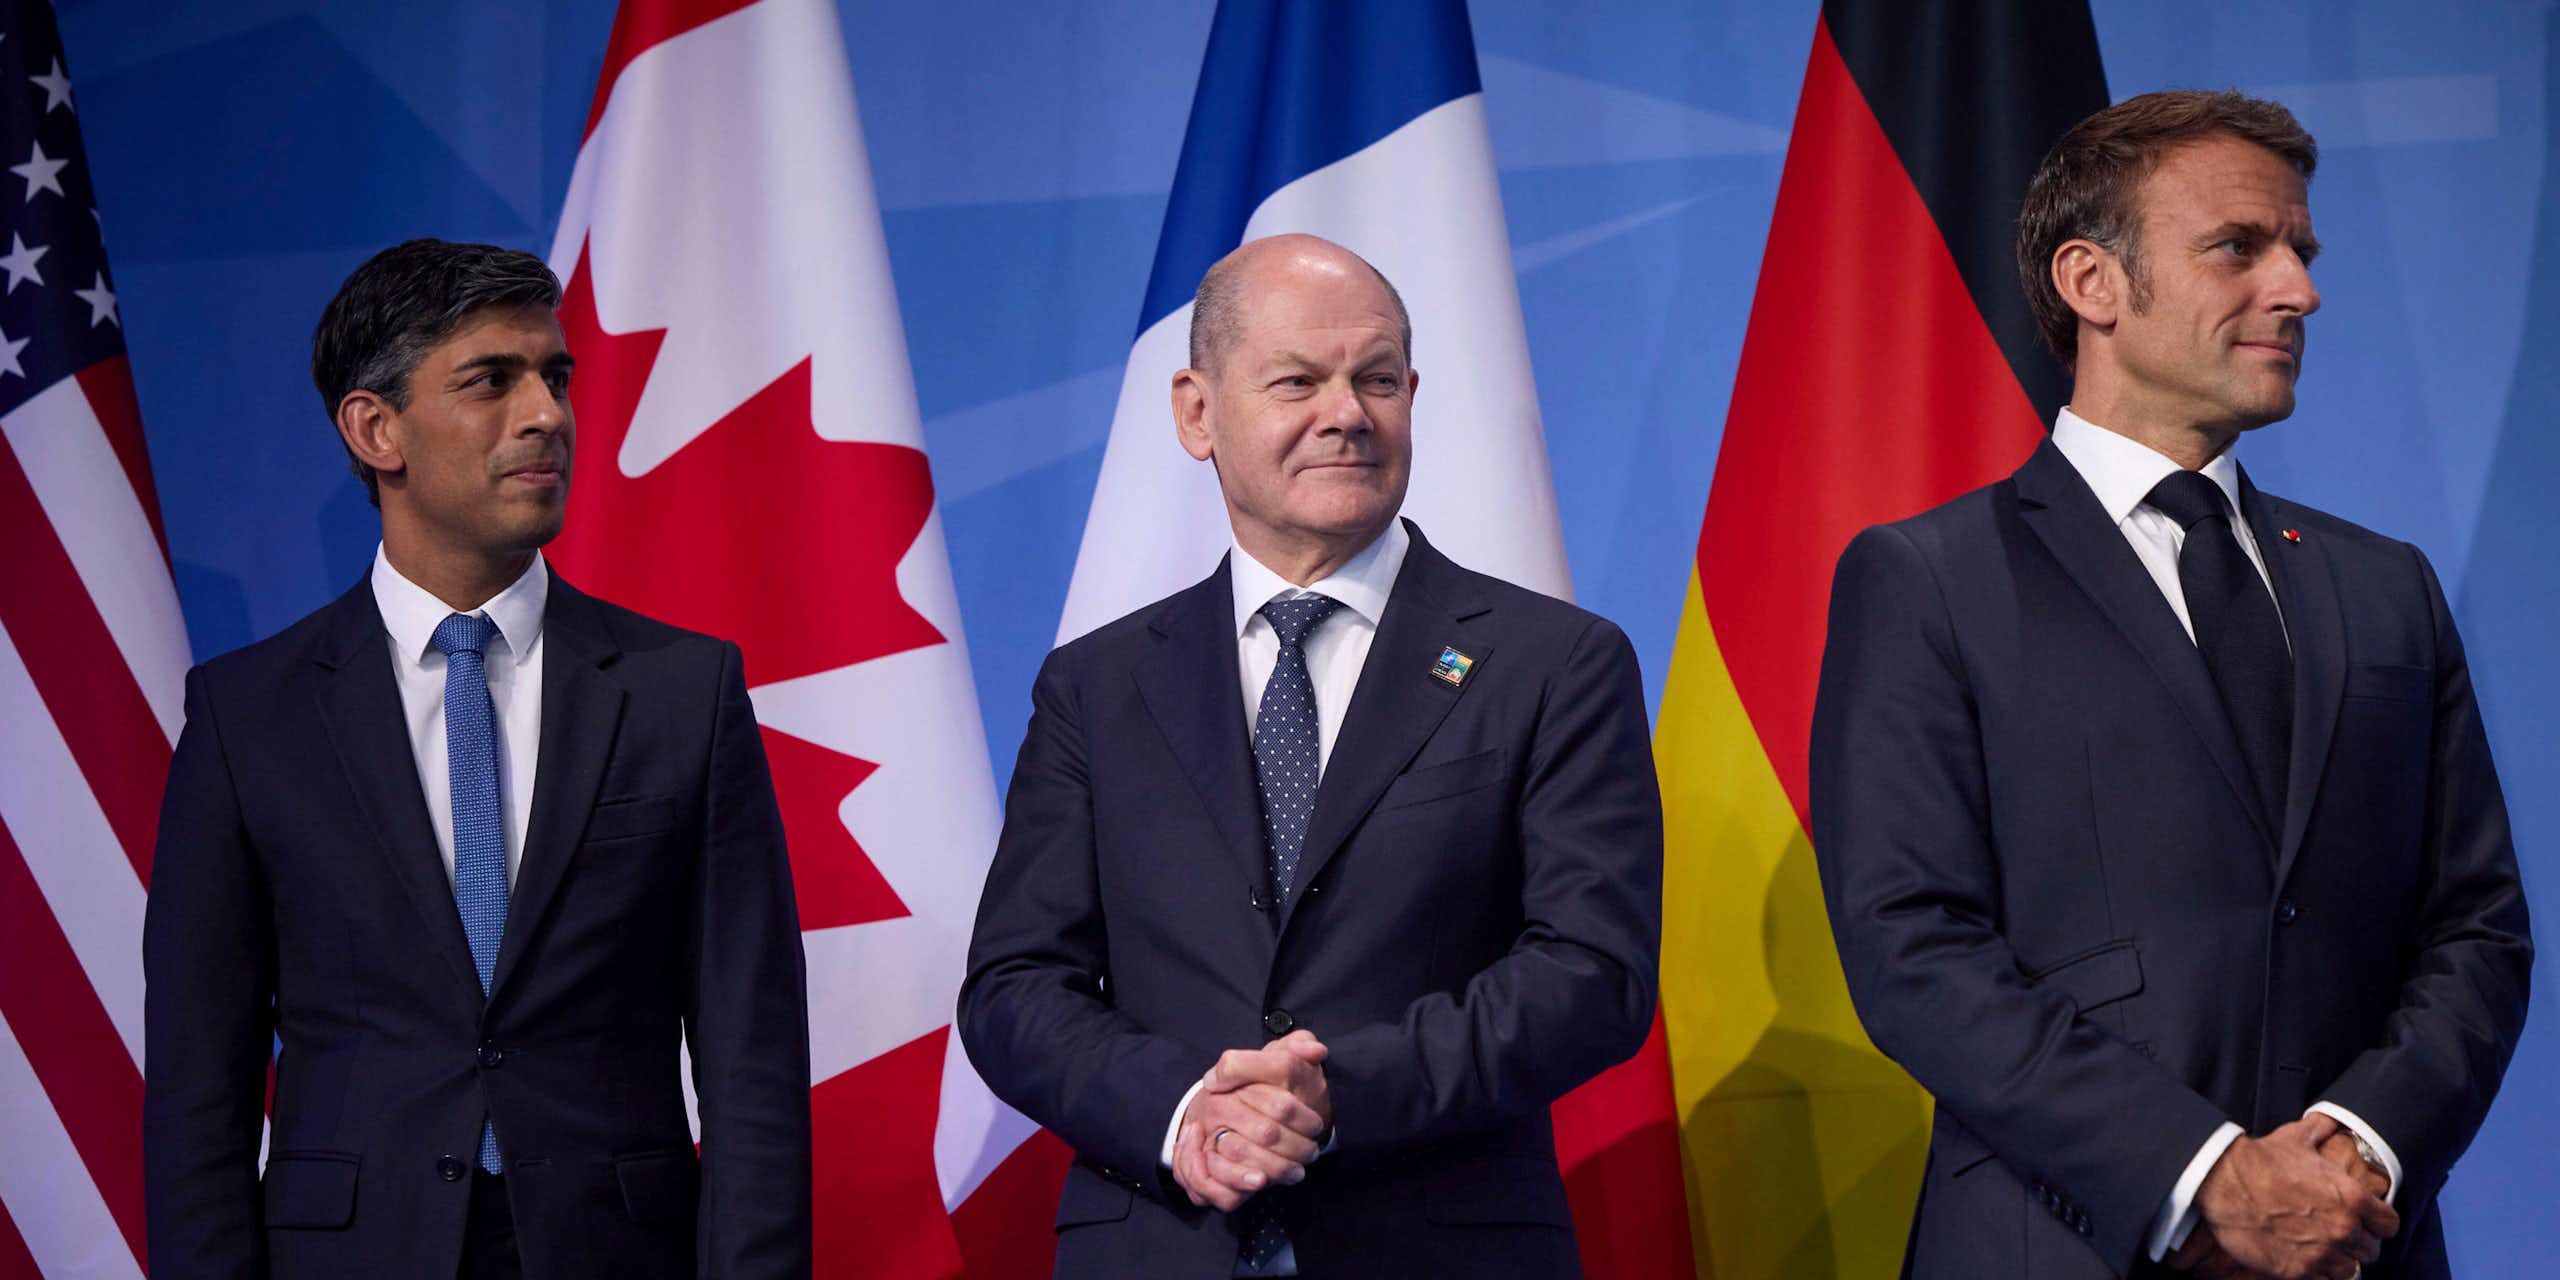 Rishi Sunak, Olaf Scholz, and Emmanuel Macron in front of flags.